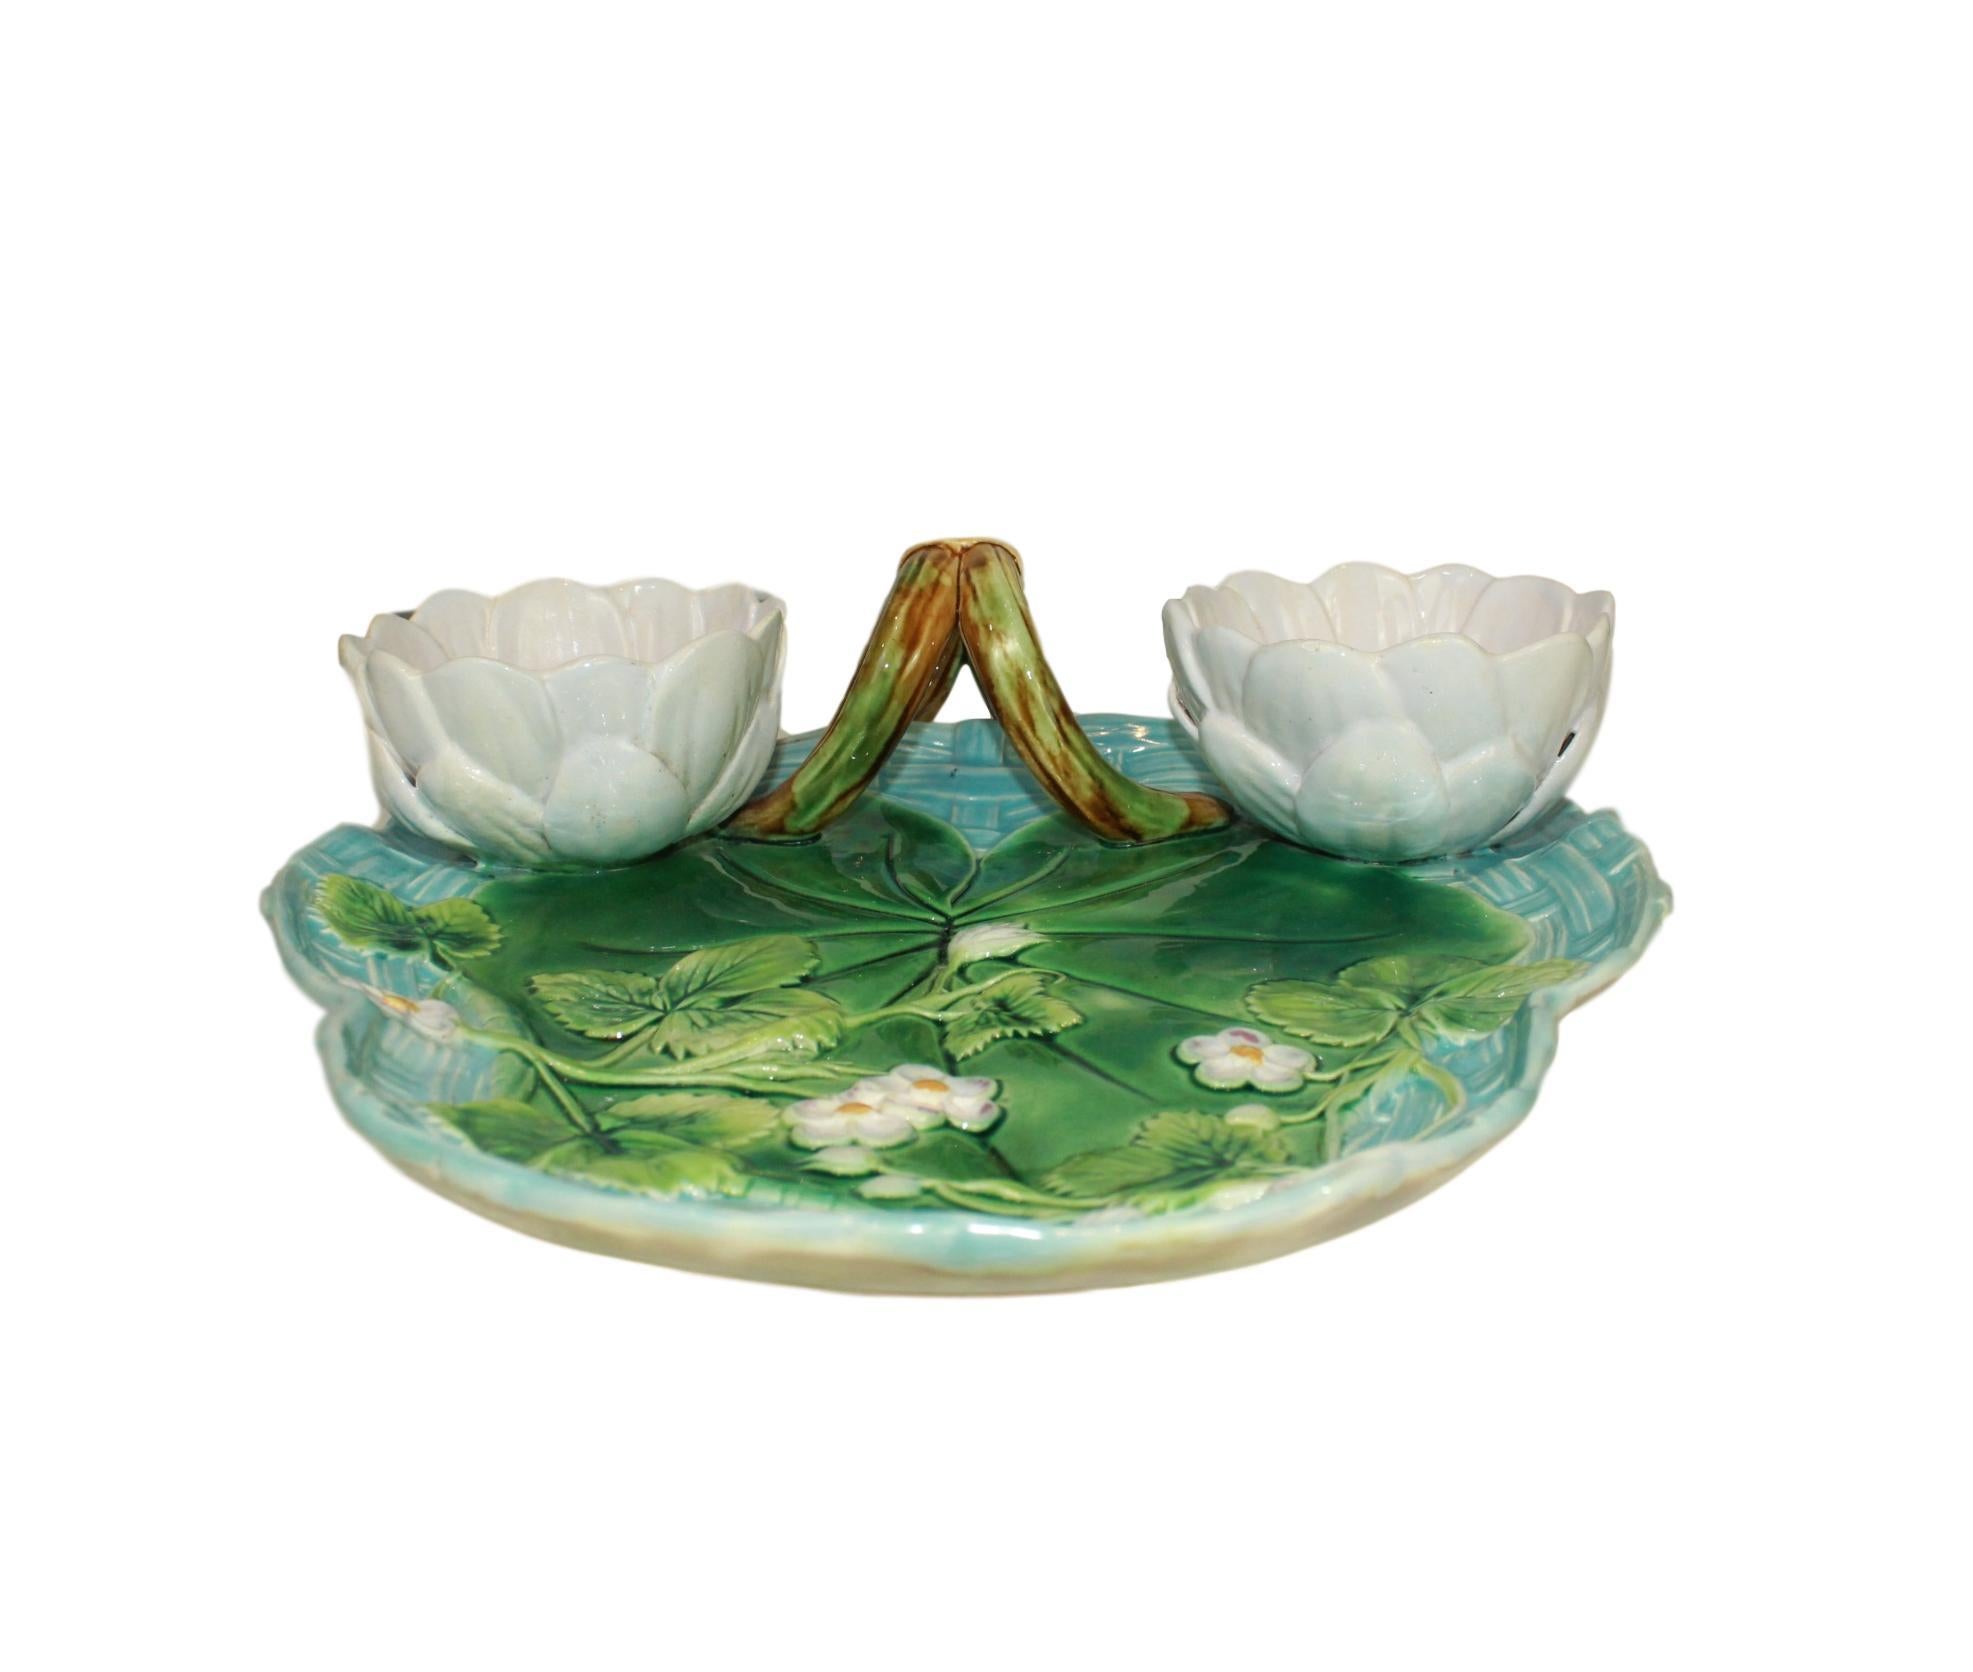 Victorian George Jones Majolica Strawberry Server Turquoise and Green, English, Dated 1877